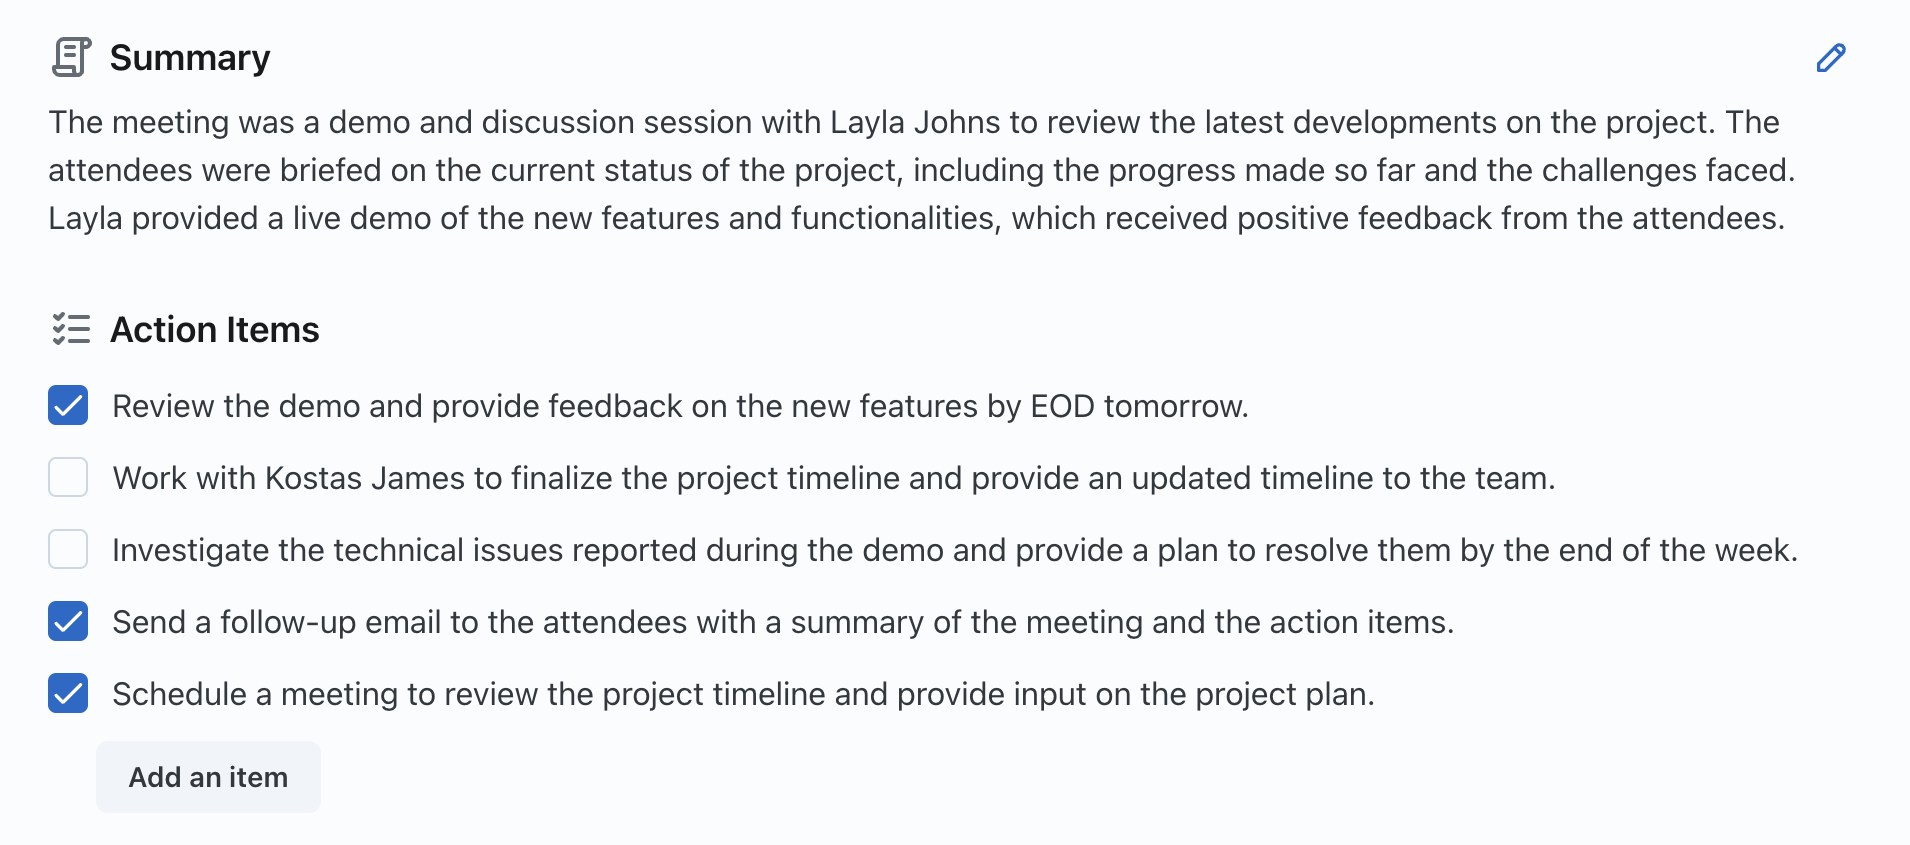 Meeting Summary and Actions